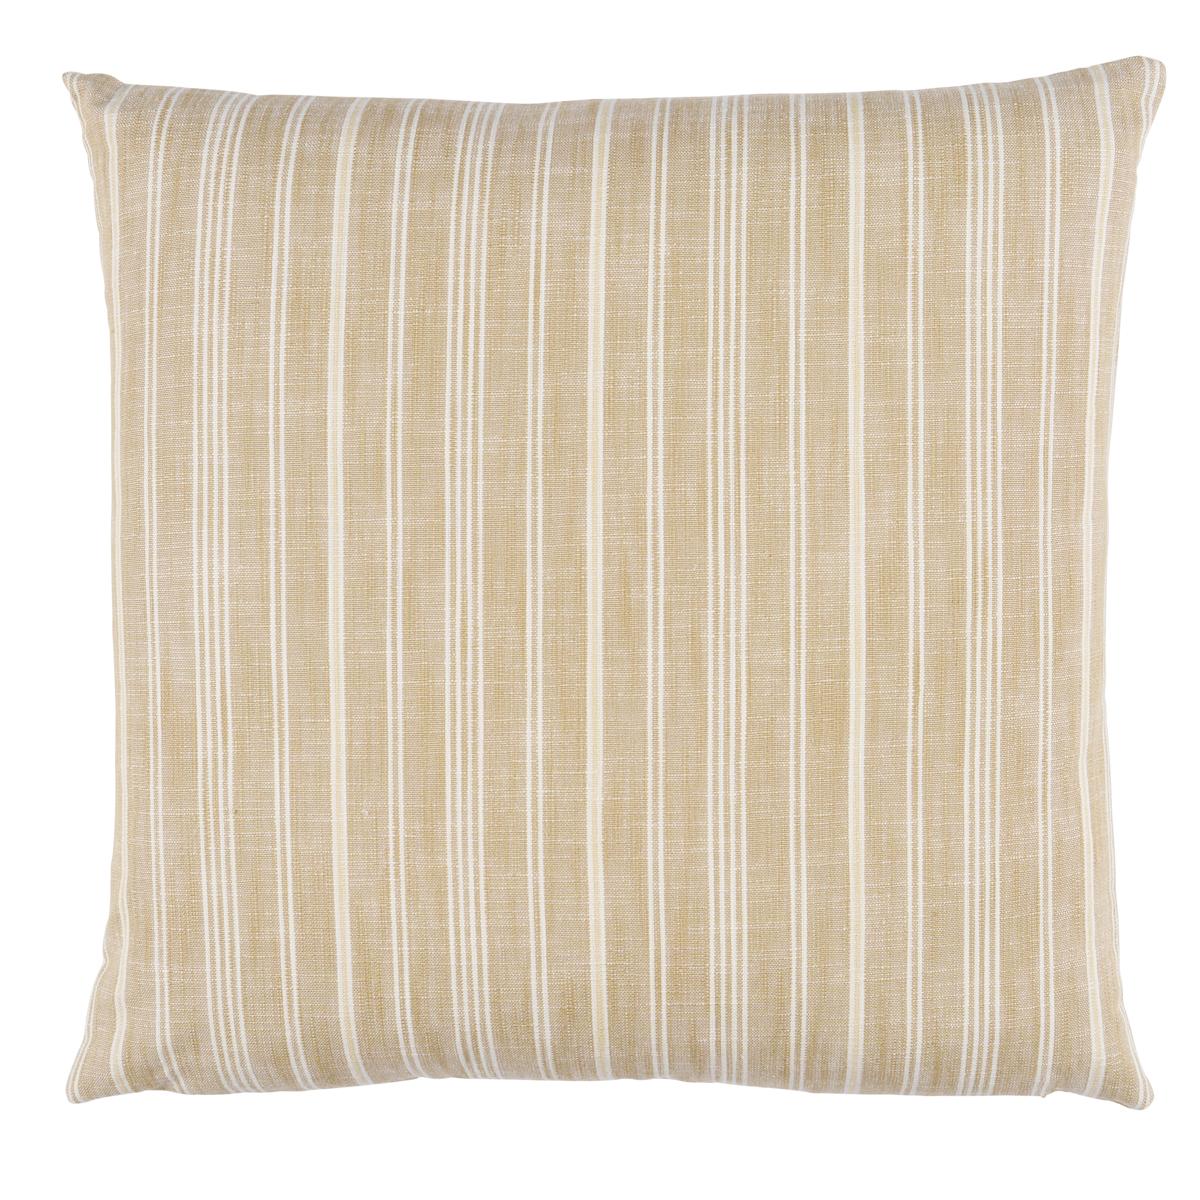 Lucy Stripe Pillow in Neutral 18 x 18" For Sale